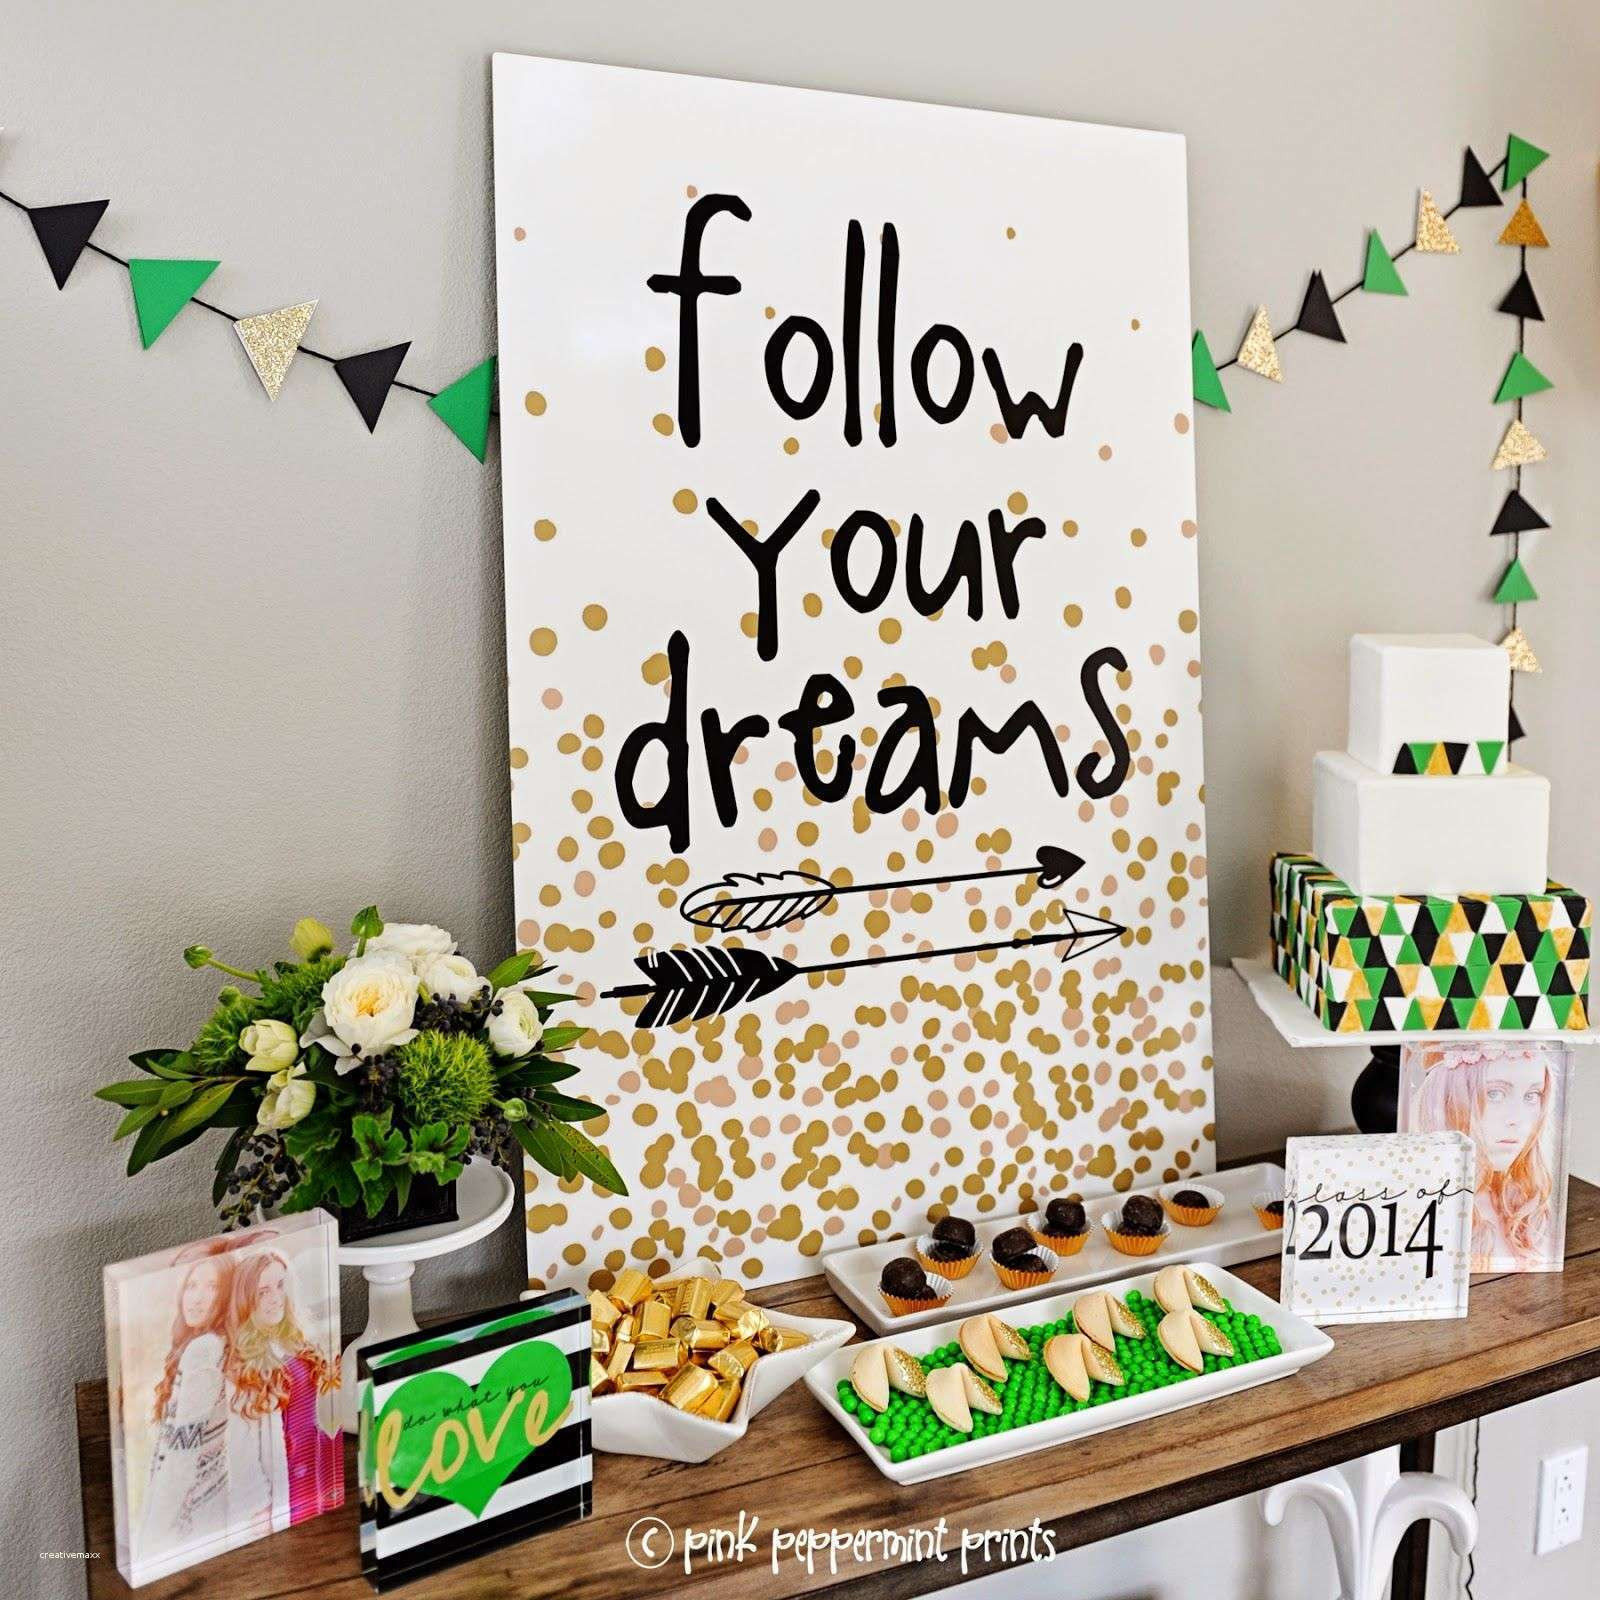 Sophisticated Graduation Party Ideas
 The 35 Best Ideas for Classy Graduation Party Ideas Best